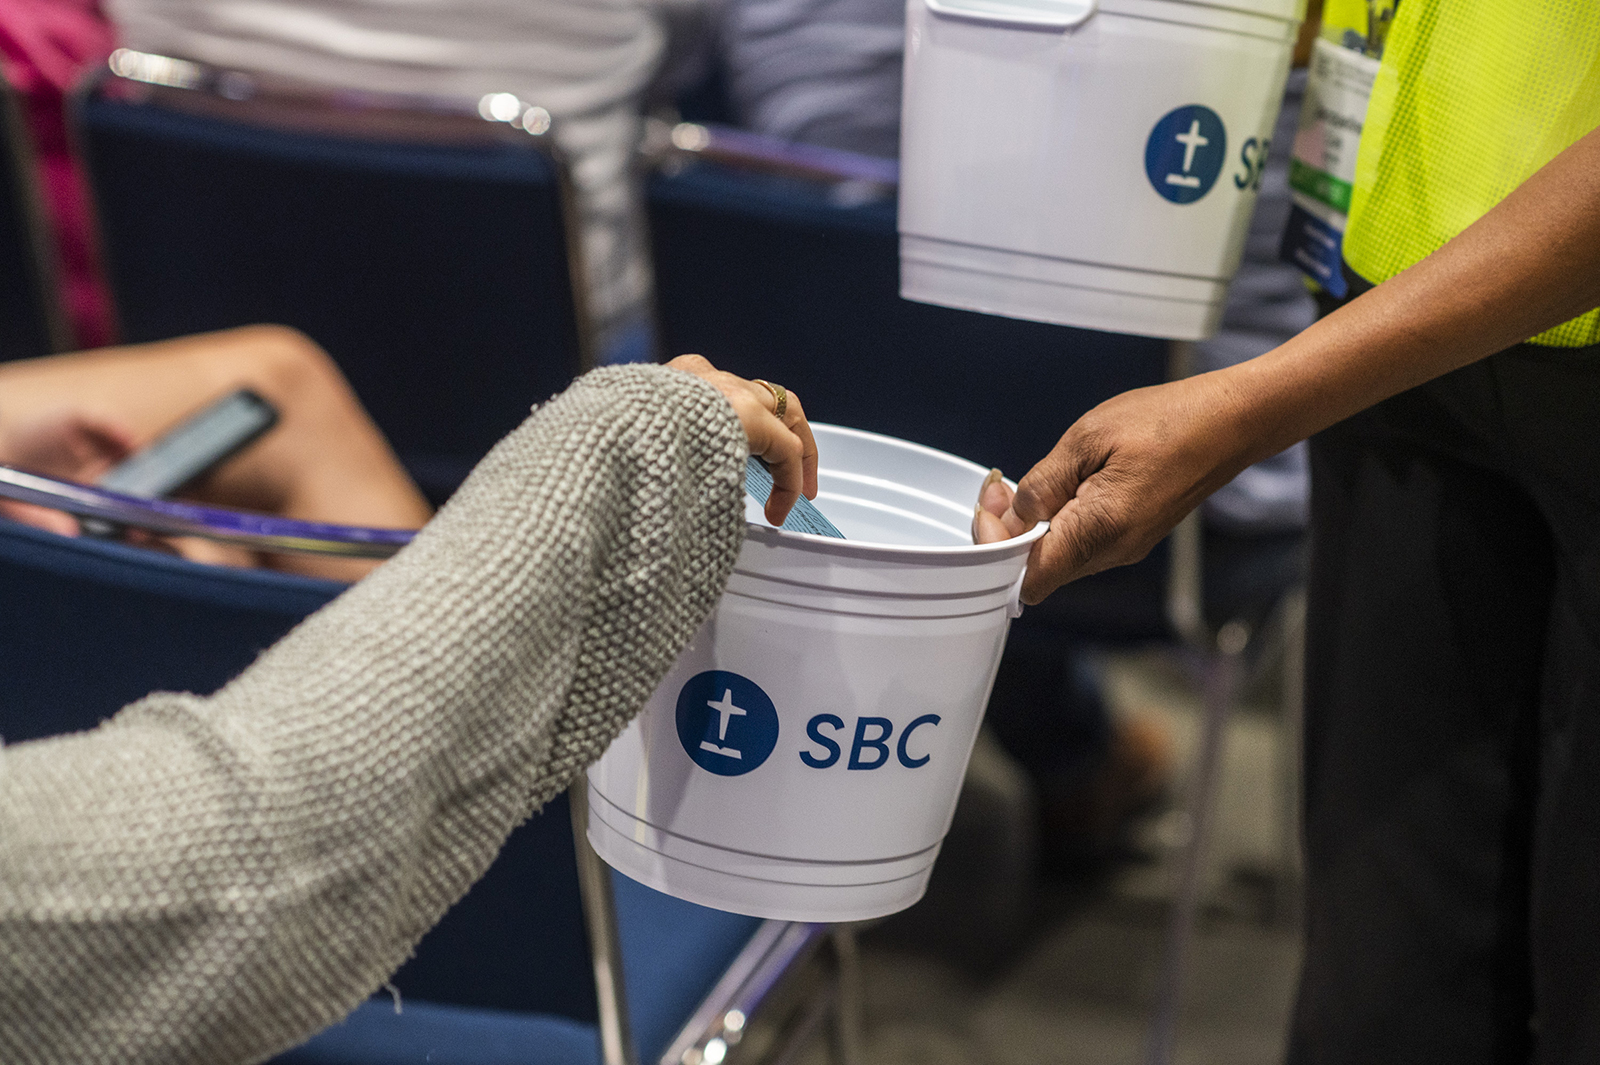 Votes are collected at the Southern Baptist Convention annual meeting at the Ernest N. Memorial Convention Center in New Orleans, La., on June 13, 2023. RNS photo by Emily Kask